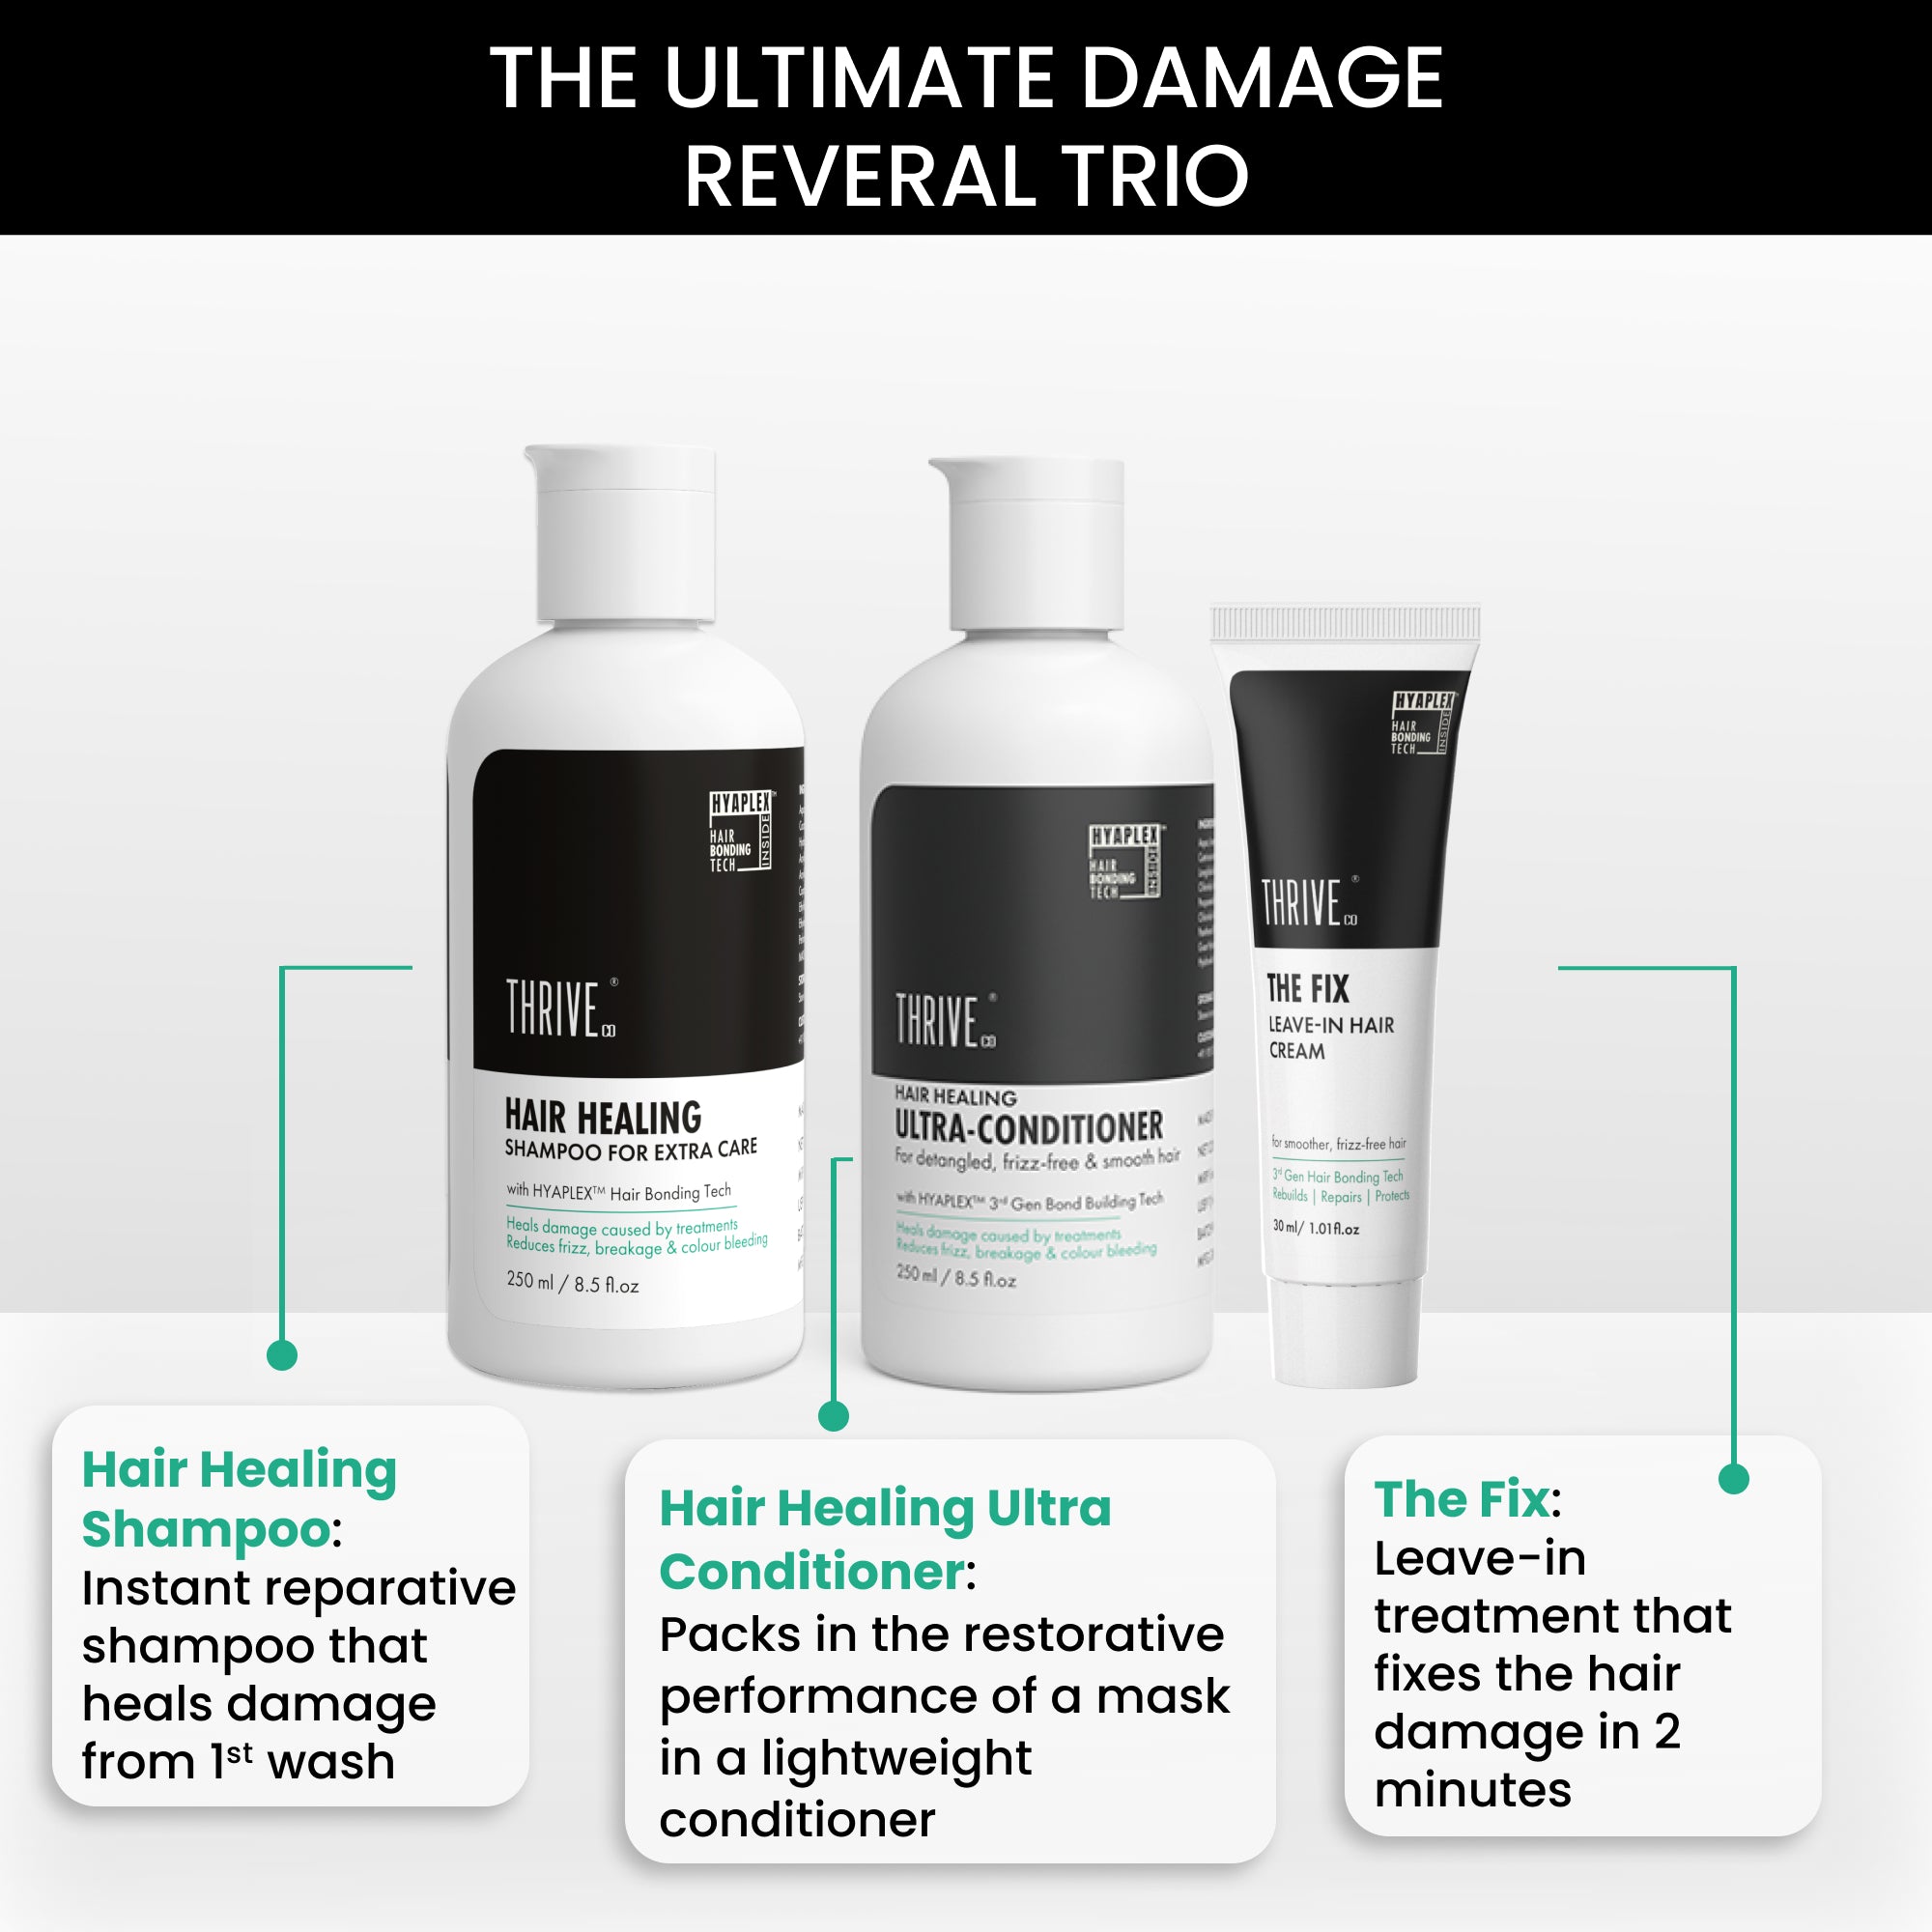 hair repair treatment with shampoo + conditioner + leave-in hair cream combo